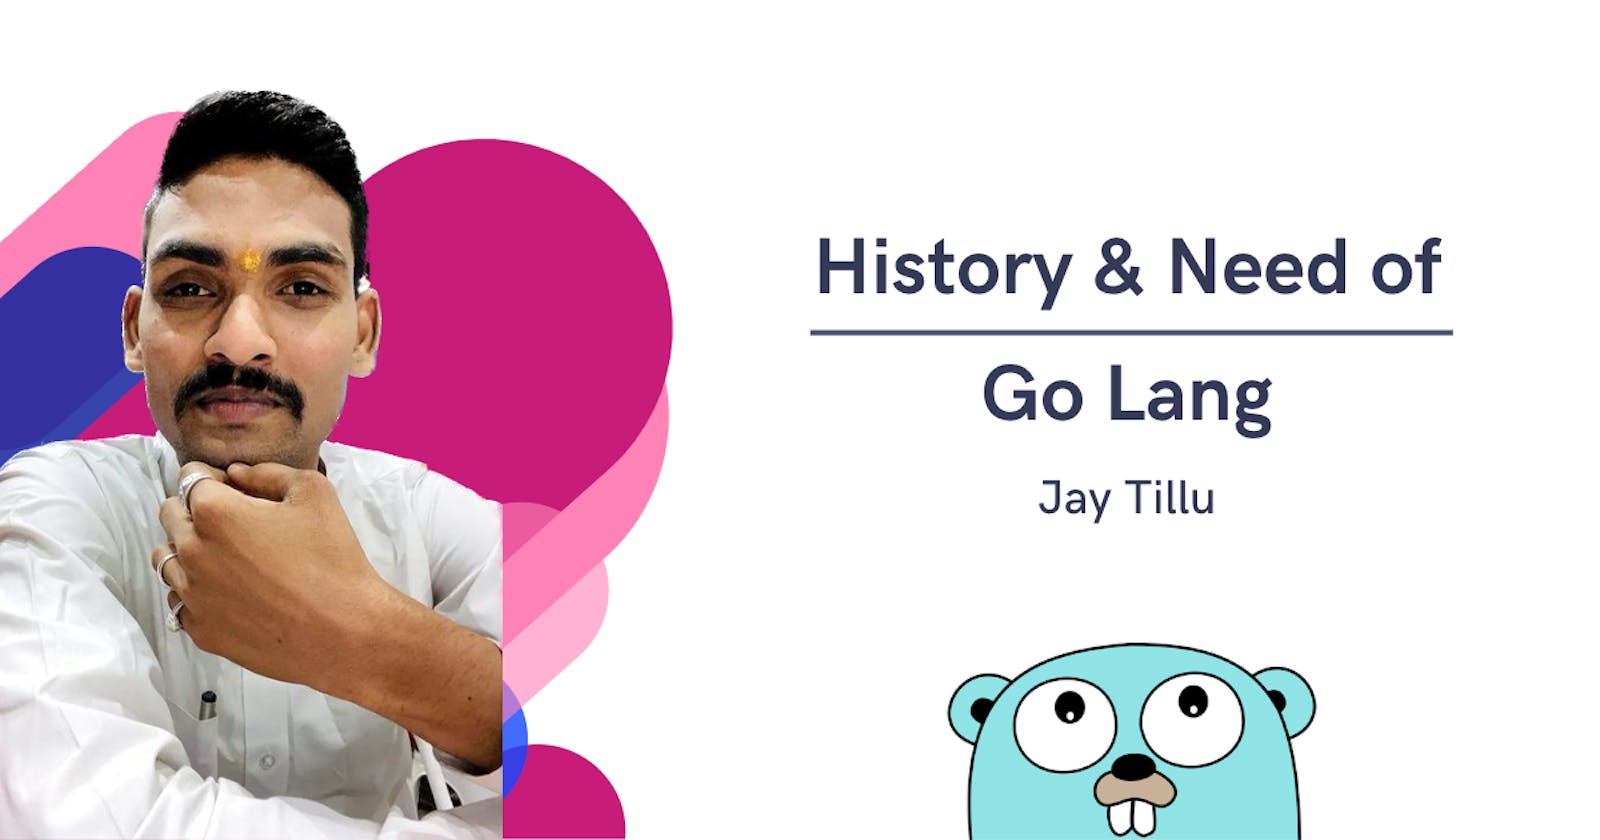 What is Go Lang? History of Go Lang